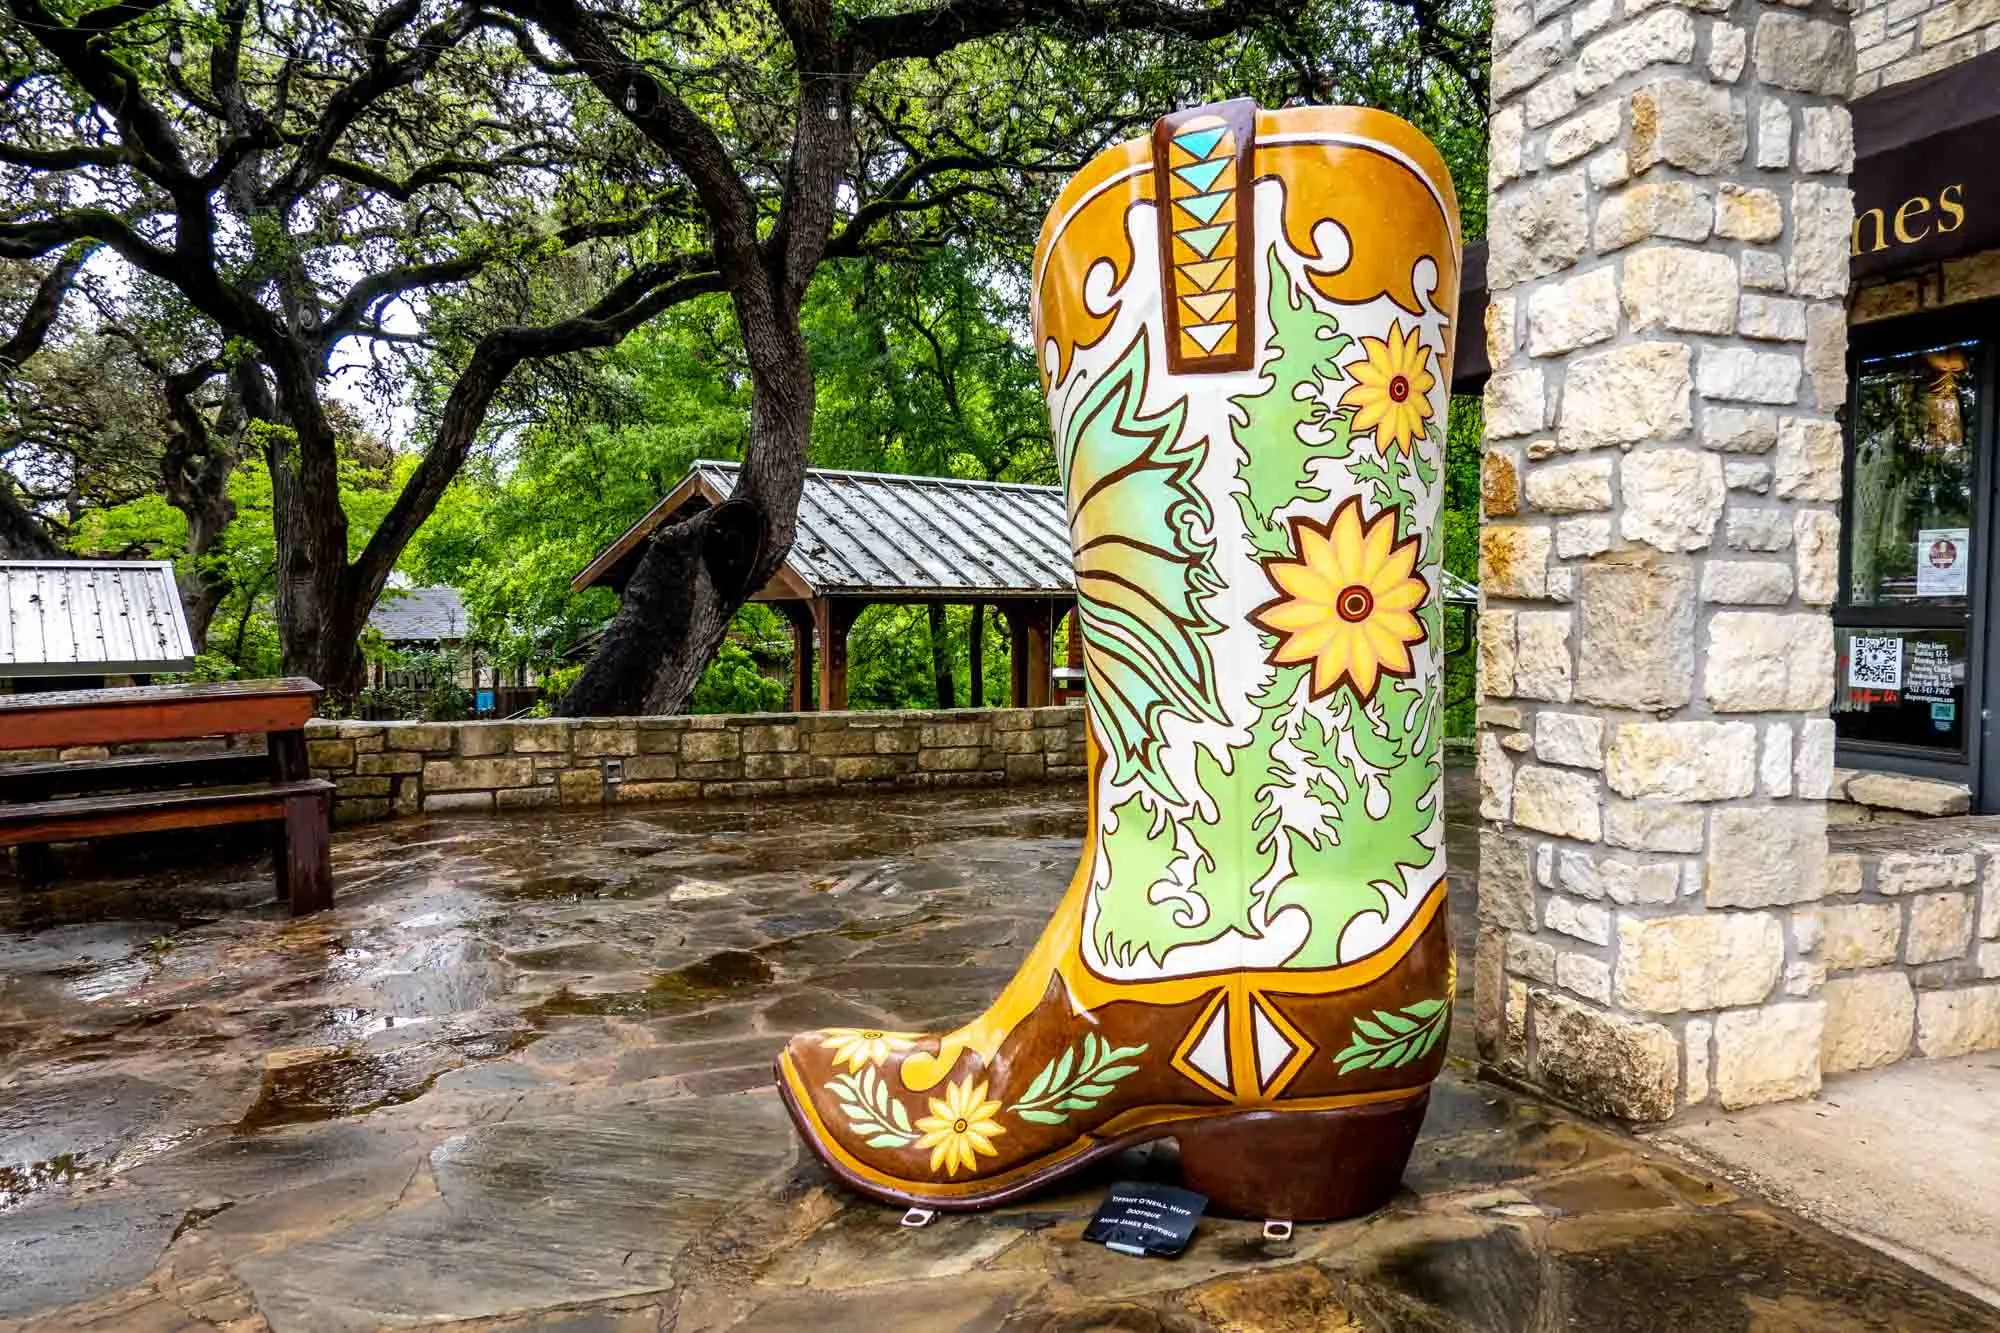 Six-foot-tall cowboy boot painted with yellow flowers and greenery.